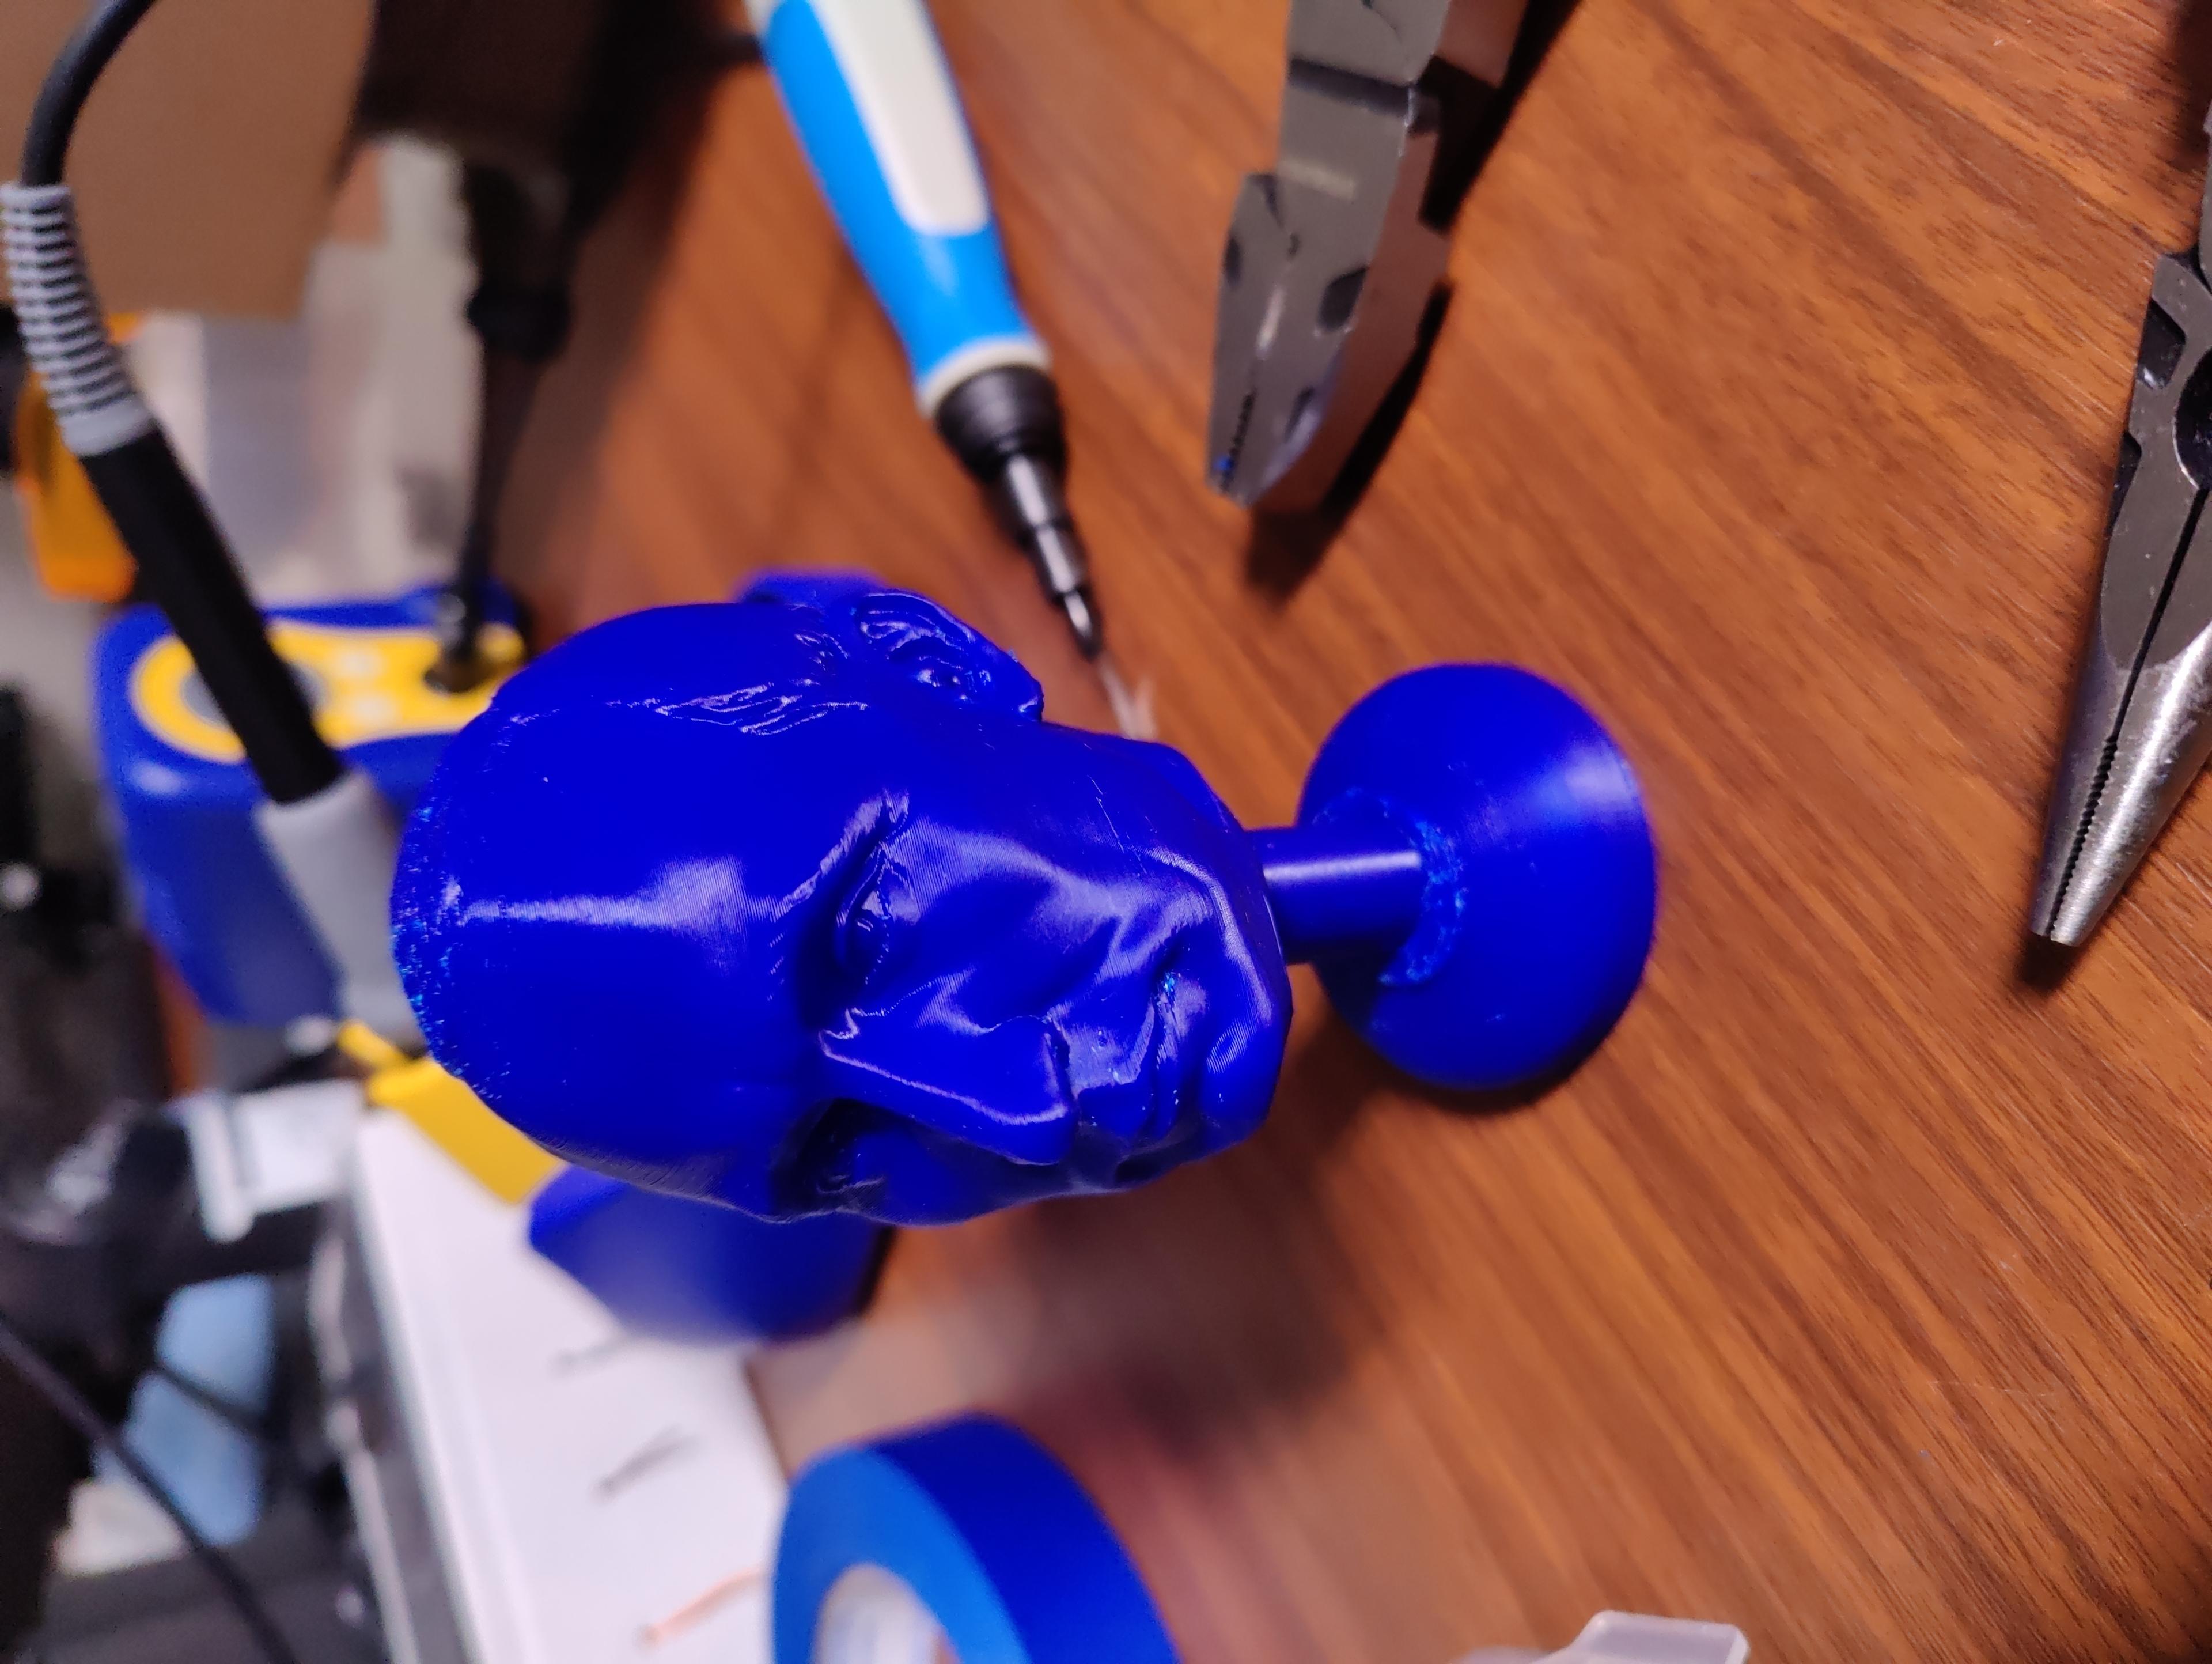 putin buttplug - Printed in one piece 0.4mm nozzle, 0.15mm layers, support "everywhere", 3 perimeters, 15% gyroid infill, printed in PLA (matter hackers blue). 4 hour print time. - 3d model